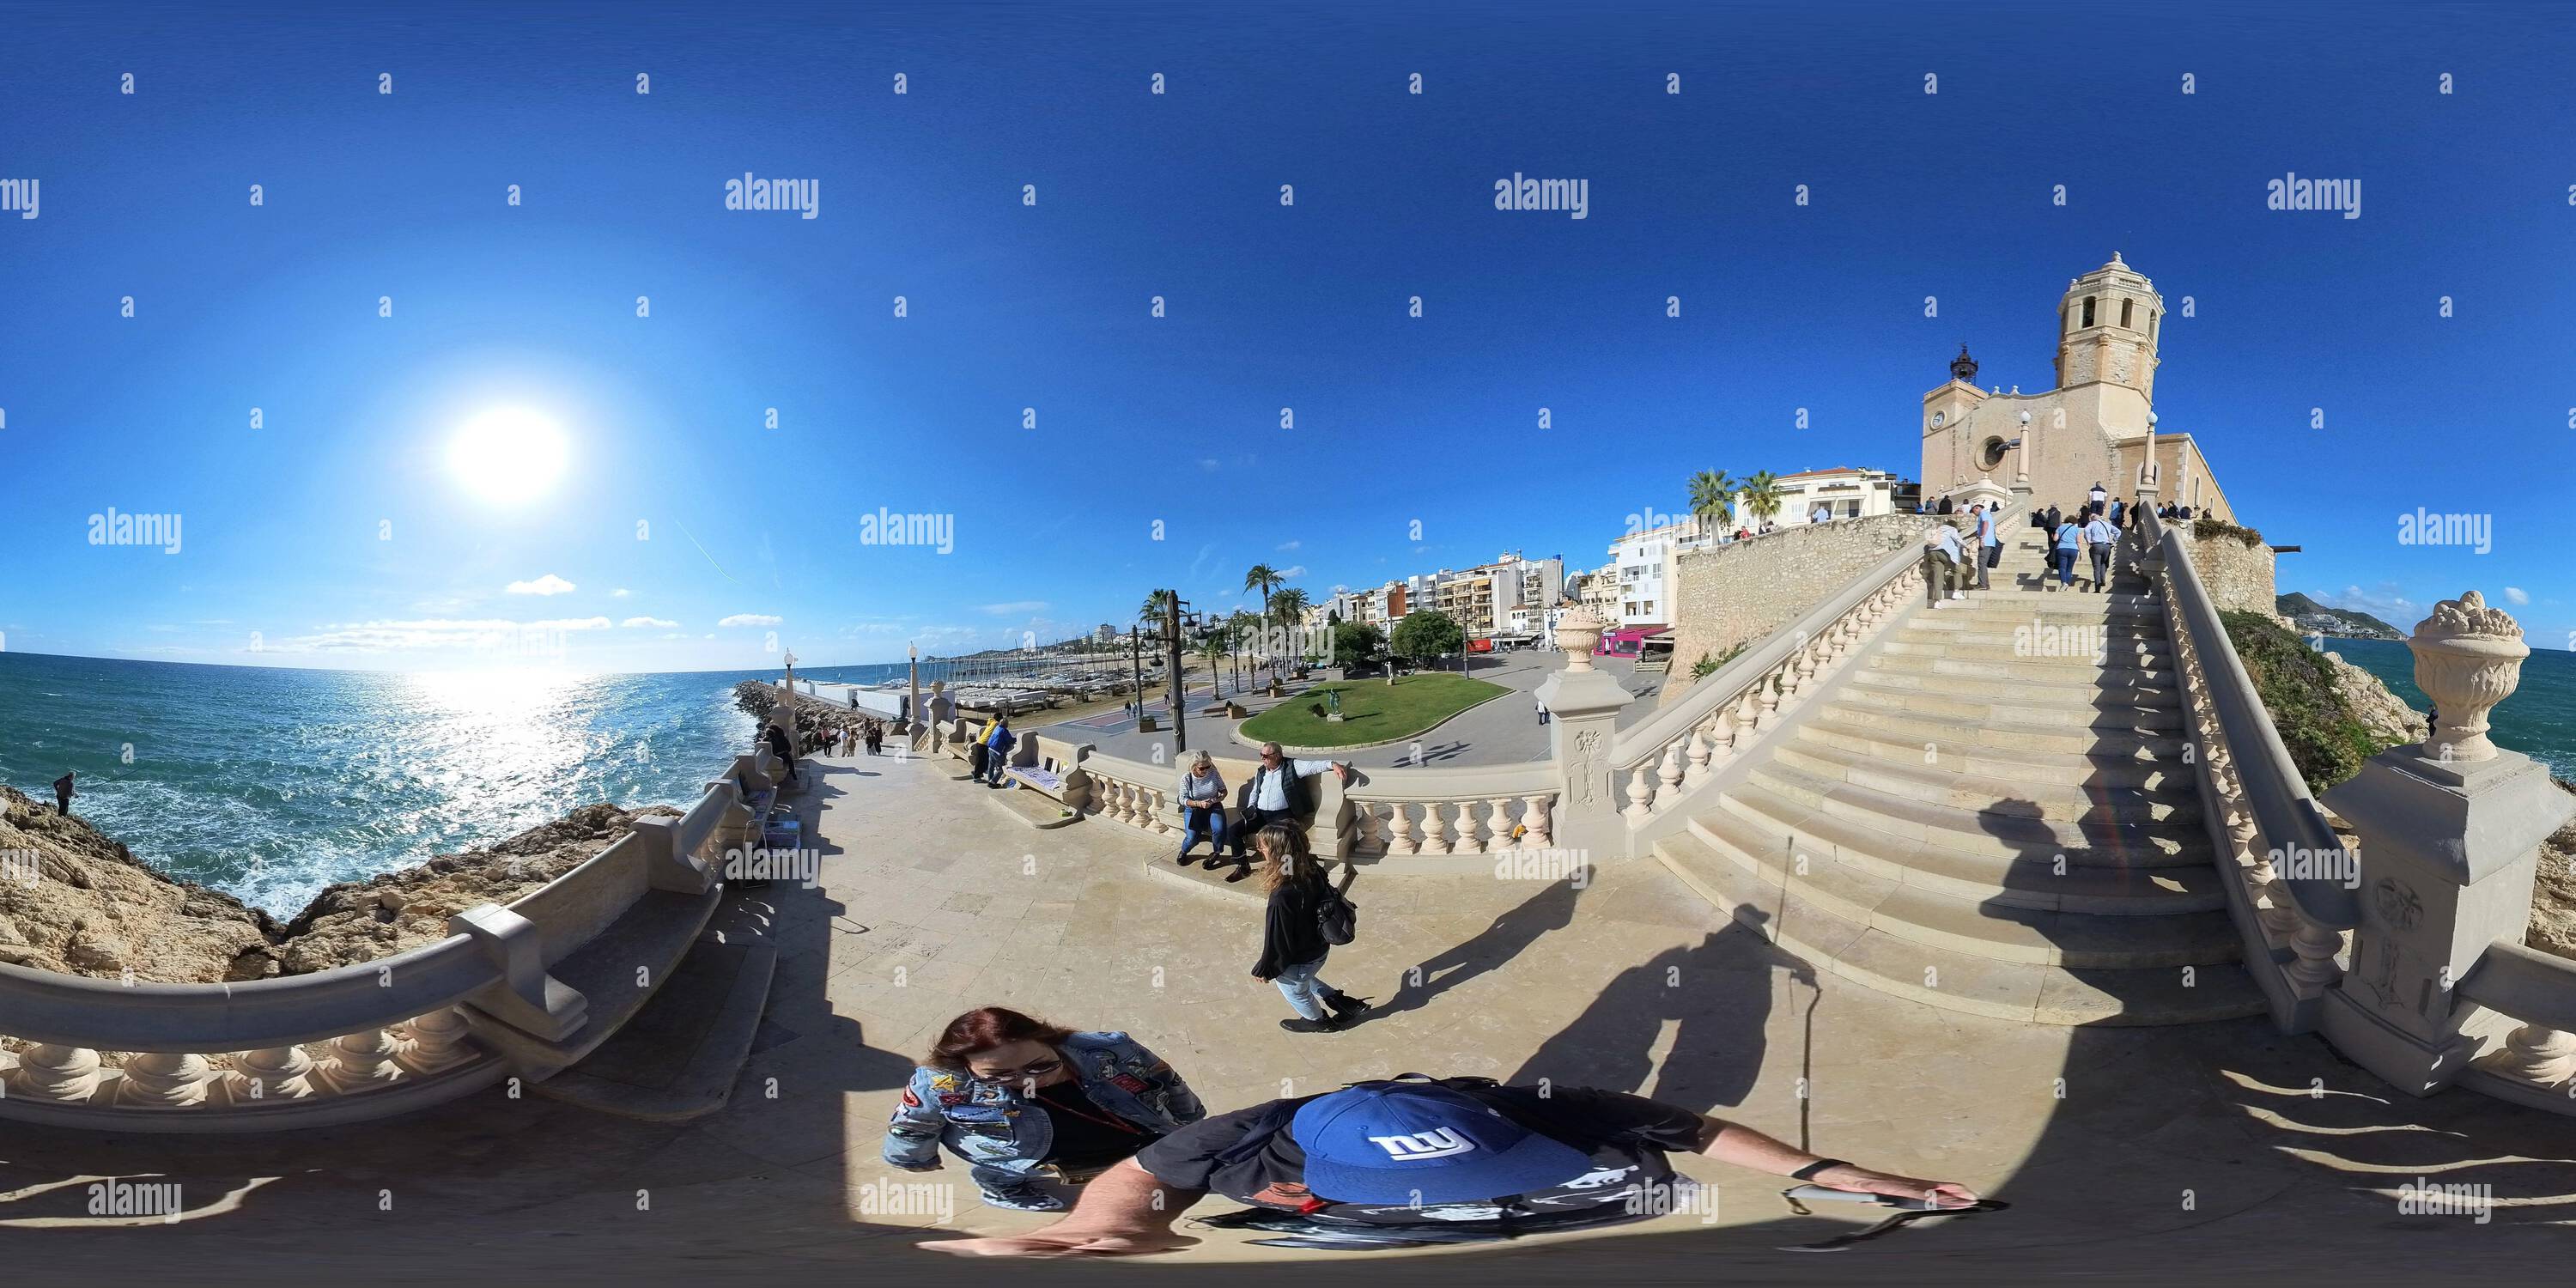 360 degree panoramic view of In Sitges, Spain near the Church of Sant Bartomeu and Santa Tecla.  Sitges is an old city on the shore of the Mediterranean Sea